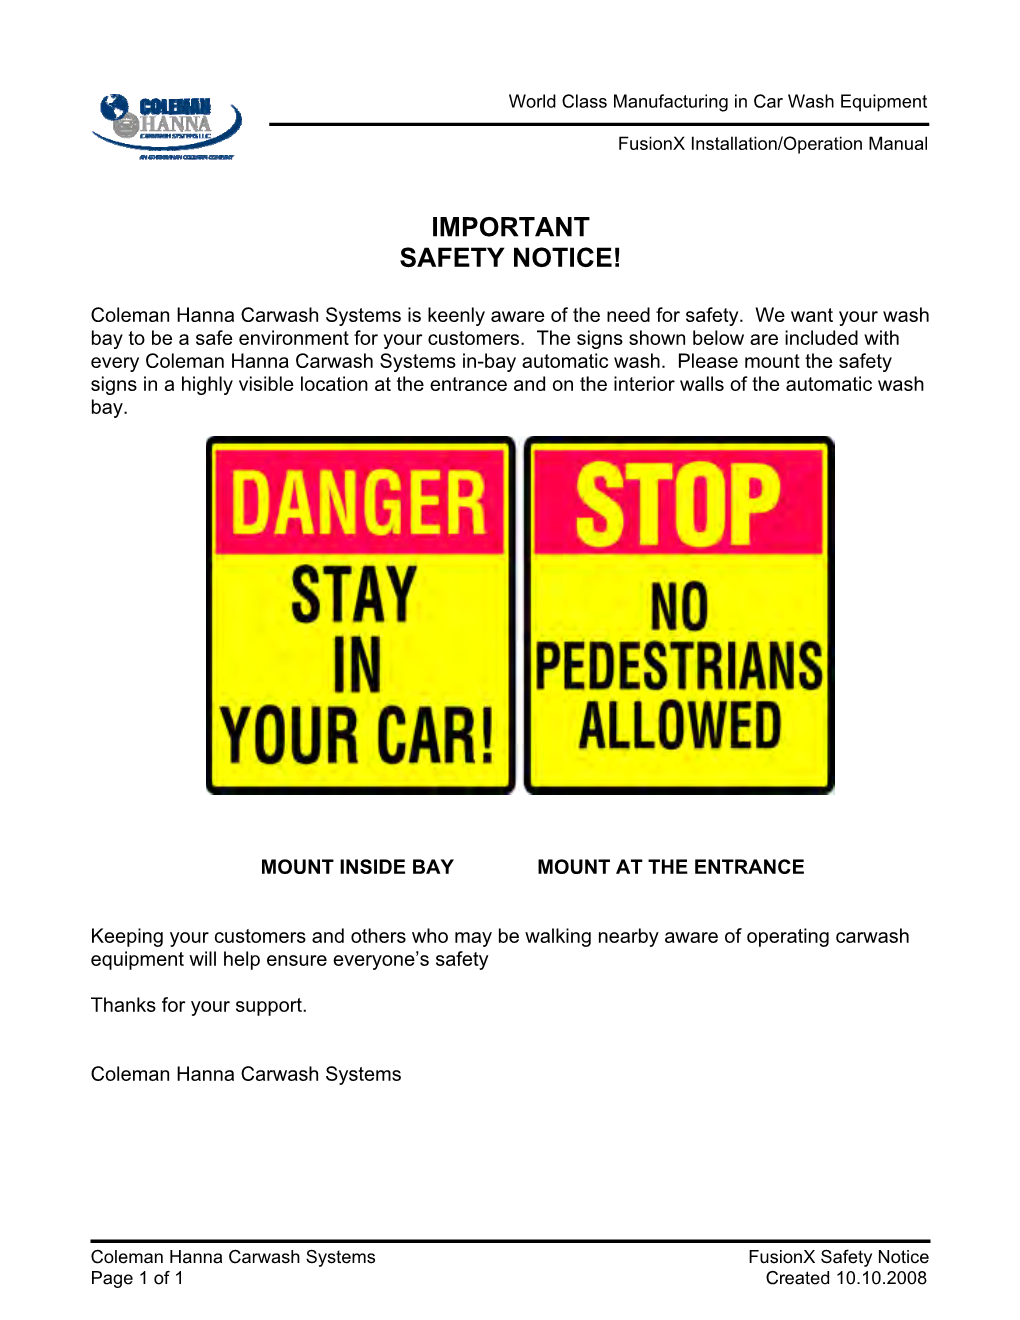 Important Safety Notice!